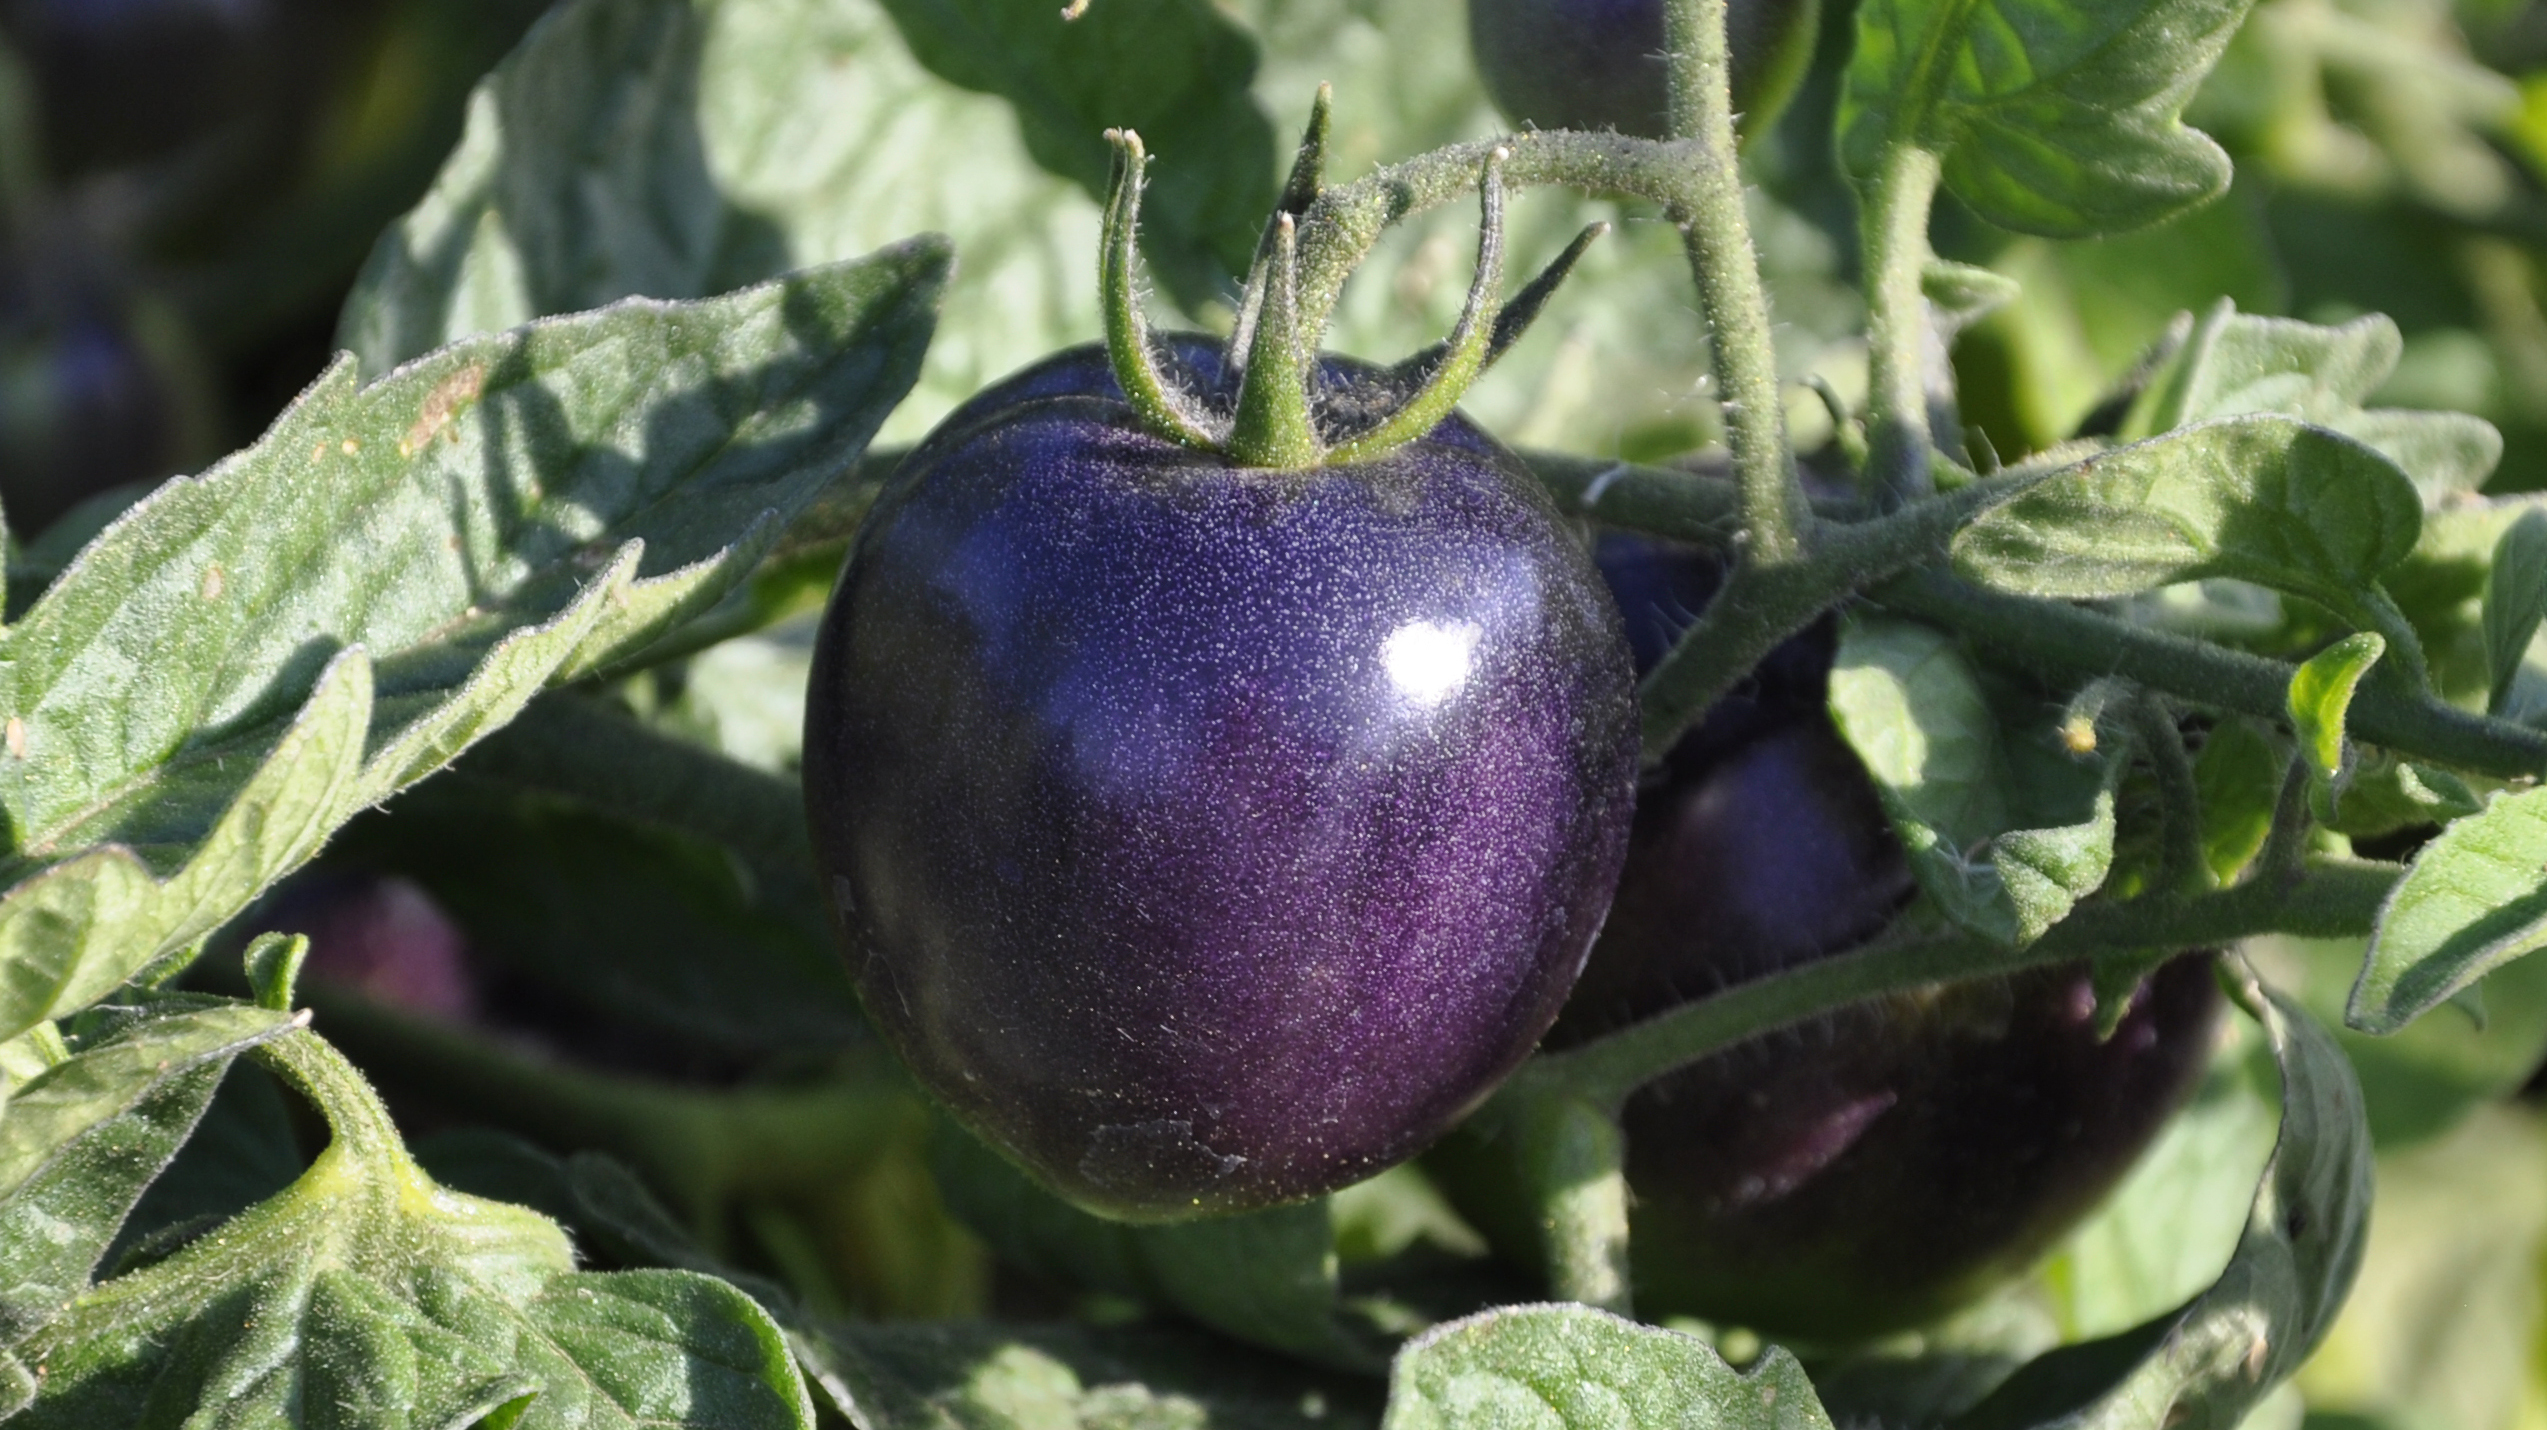 The Indigo Rose tomato was developed by Jim Myers, a vegetable breeder at Oregon State University. Photo: Courtesy of Oregon State University